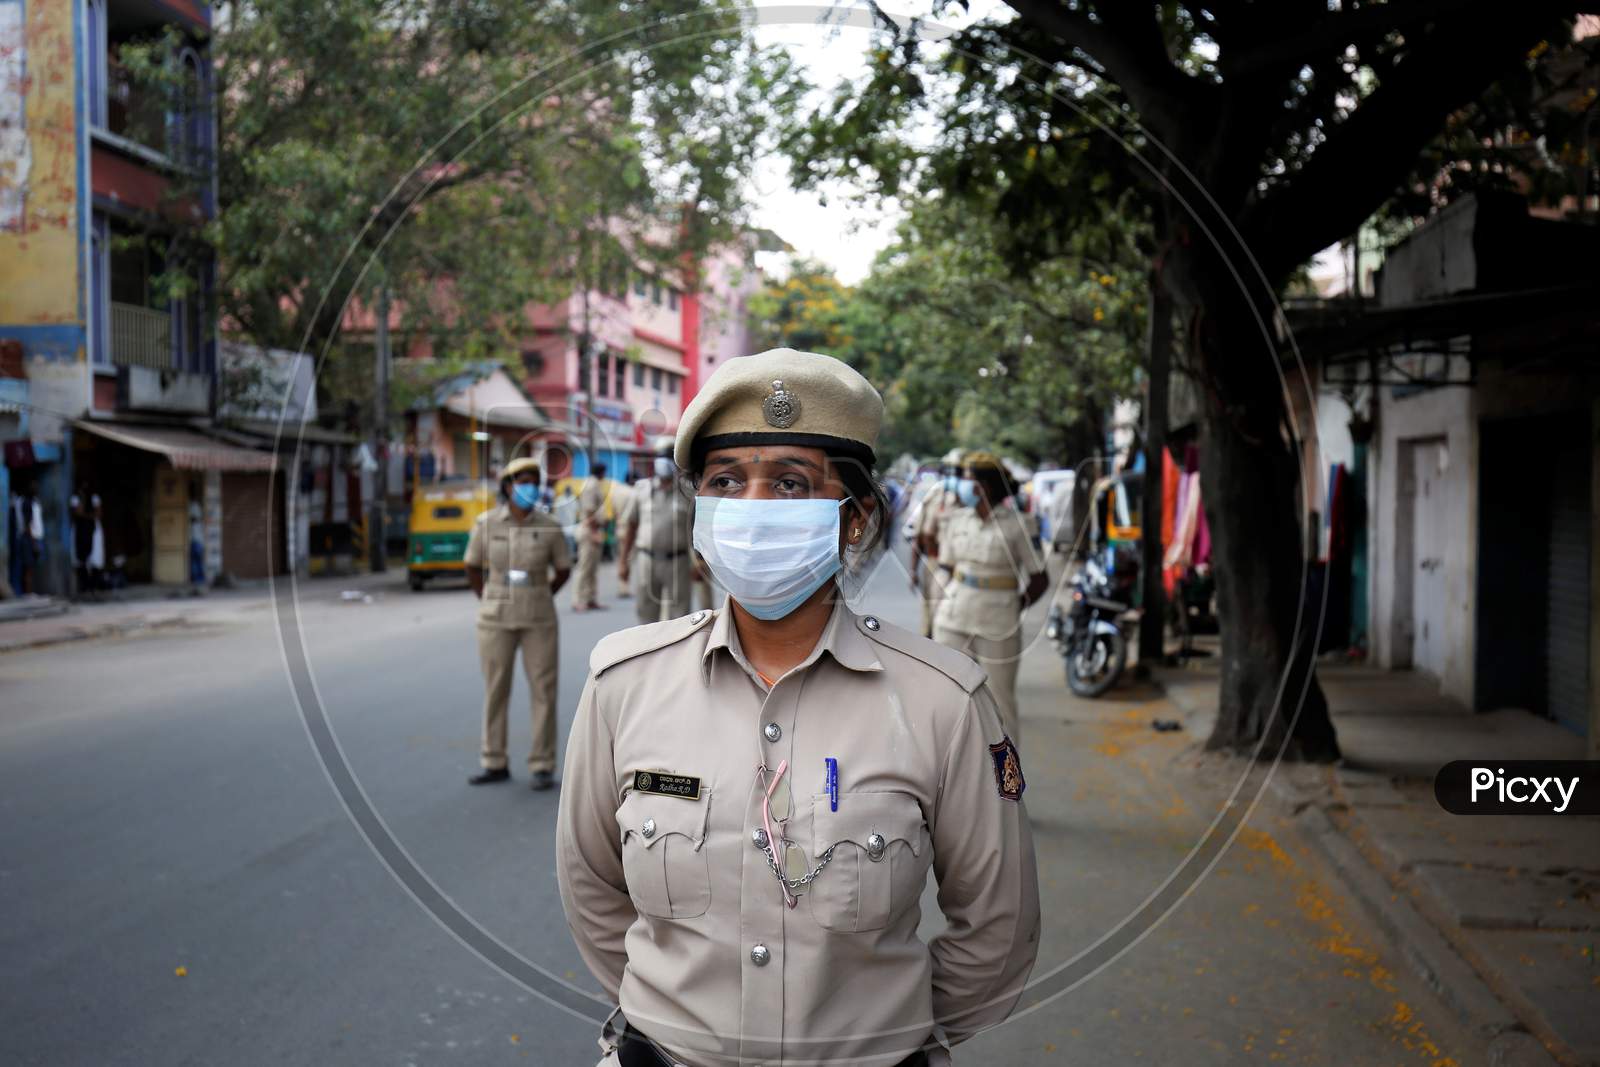 Bangalore City police Wearing Safety mask During Duty hours For Corona virus or COVID-19 Pandemic Situation . Bangalore